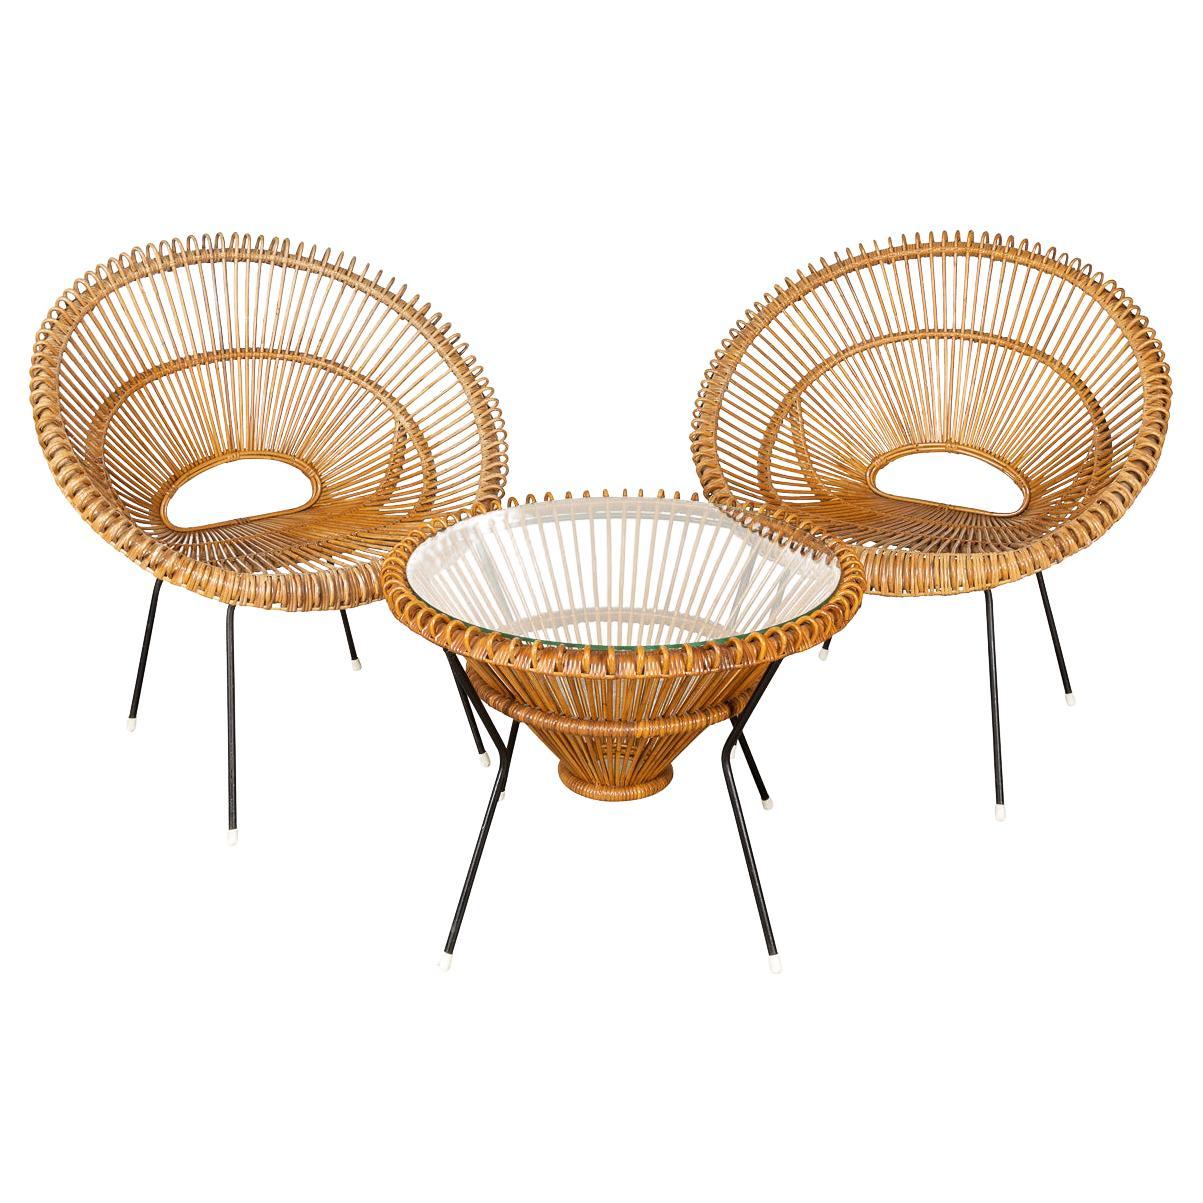 Mid-20th Century Rattan Woven Table And Chairs, By Janine Abraham, c.1960